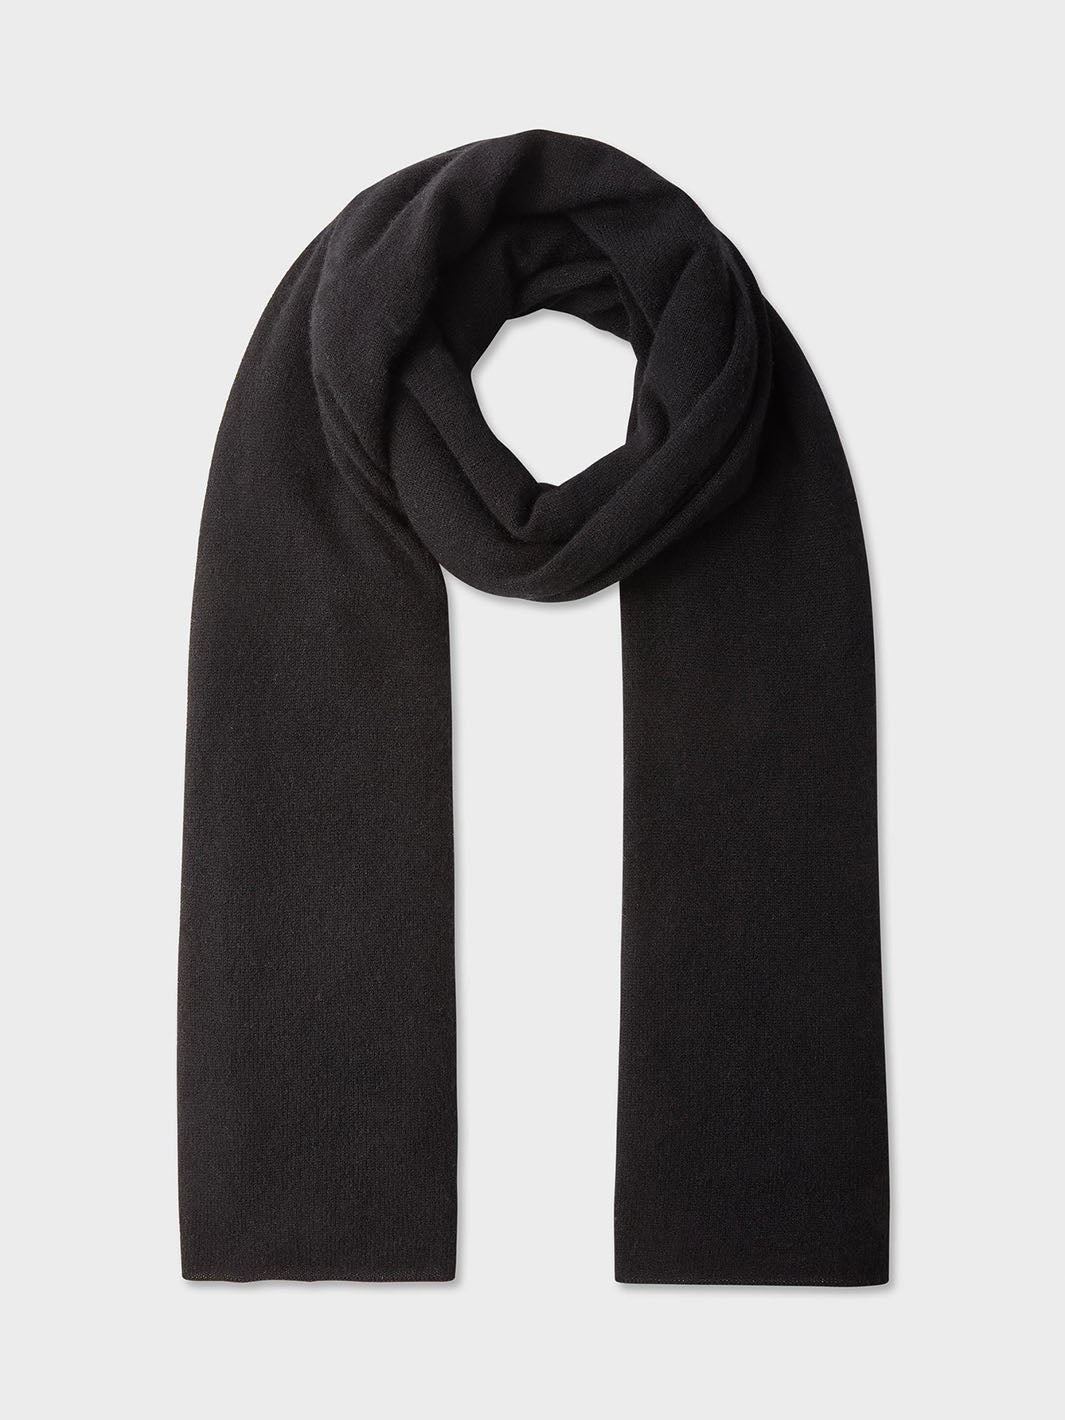 Cashmere Travel Wrap in Black